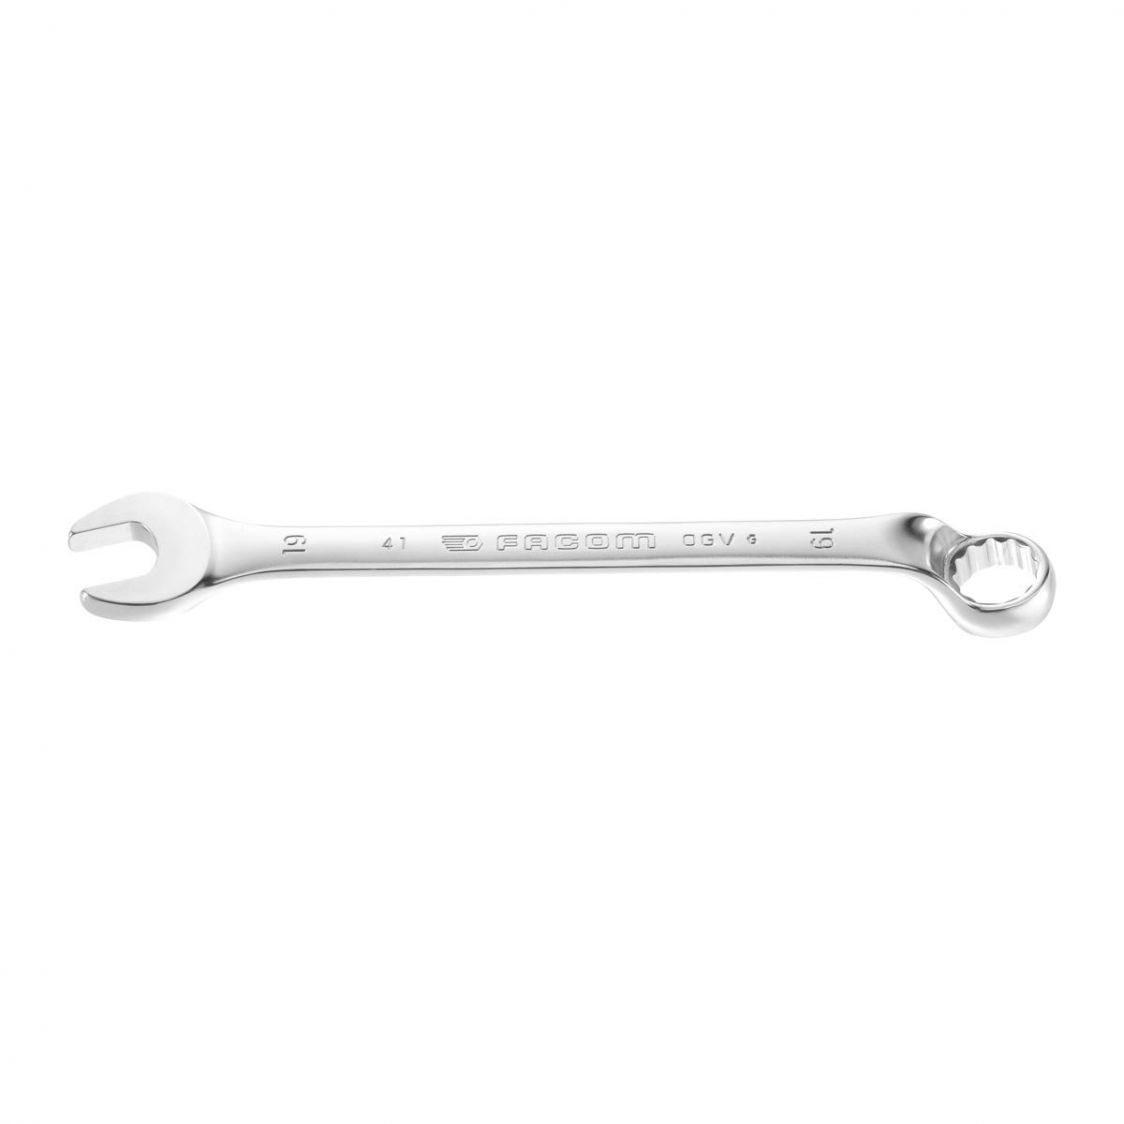 FACOM 41.6 - 6mm Metric Offset Combination Spanner